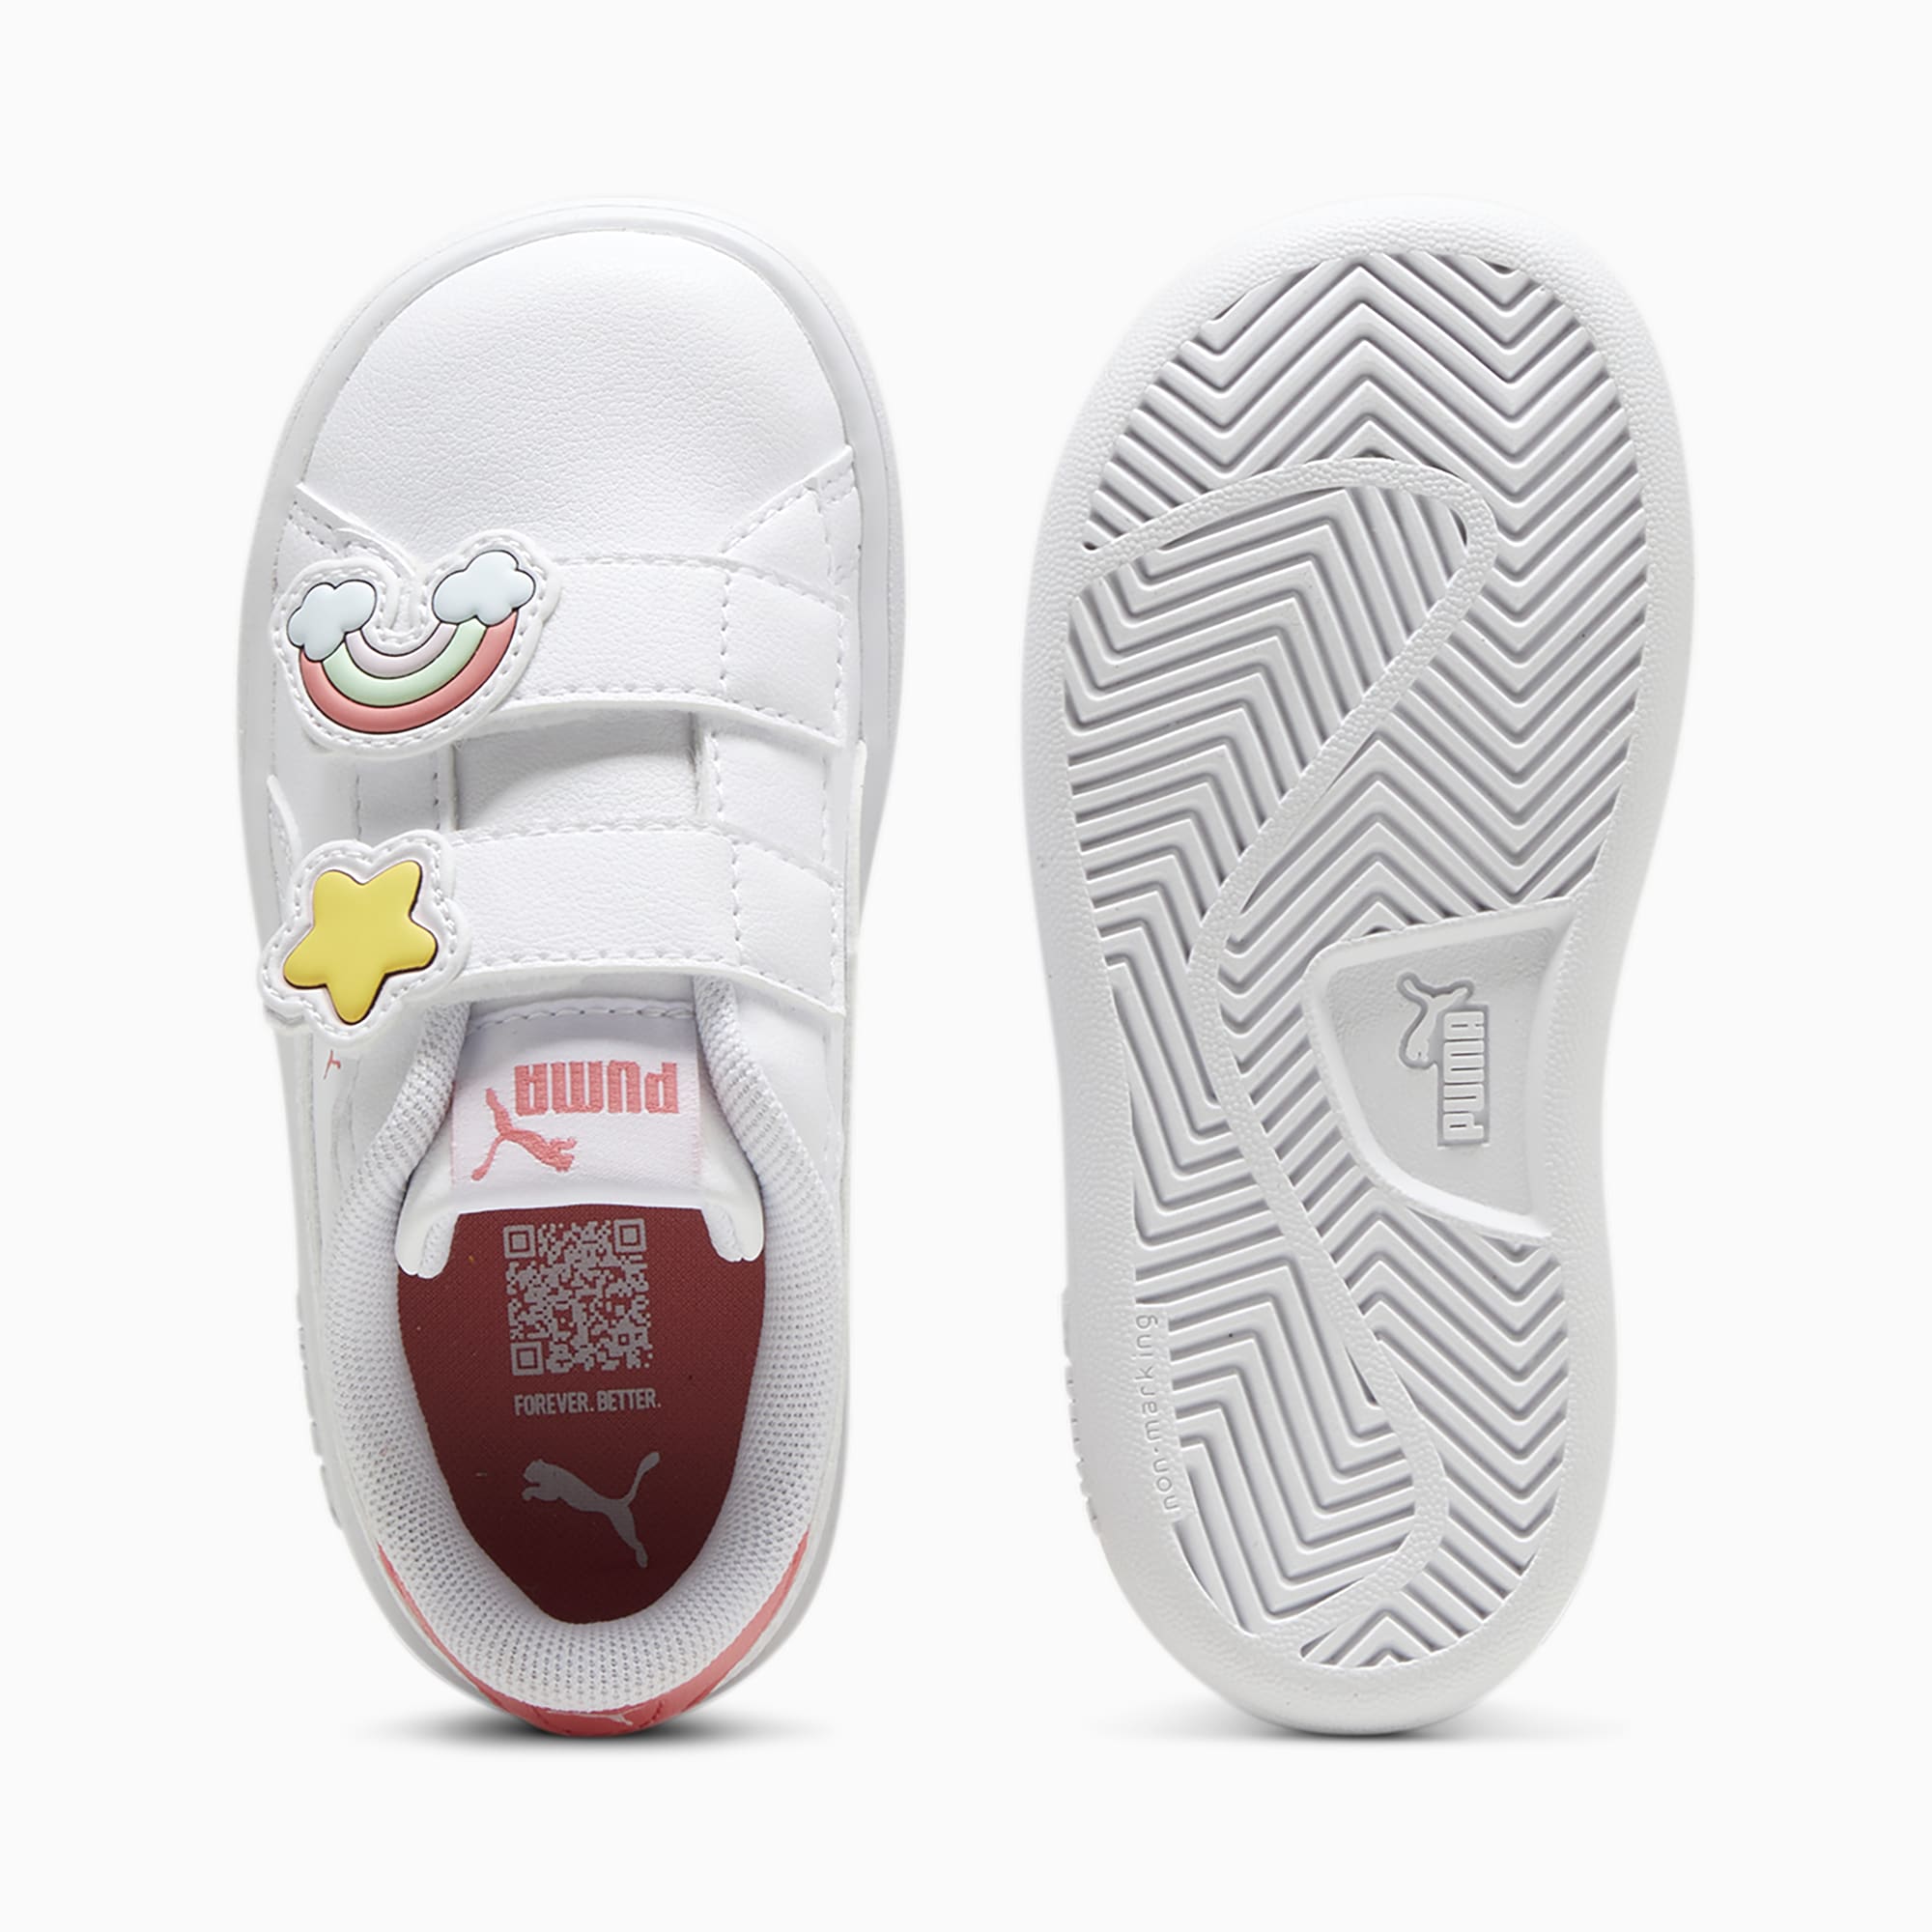 PUMA Smash 3.0 Badges Toddlers' Sneakers, White/Passionfruit, Size 19, Shoes